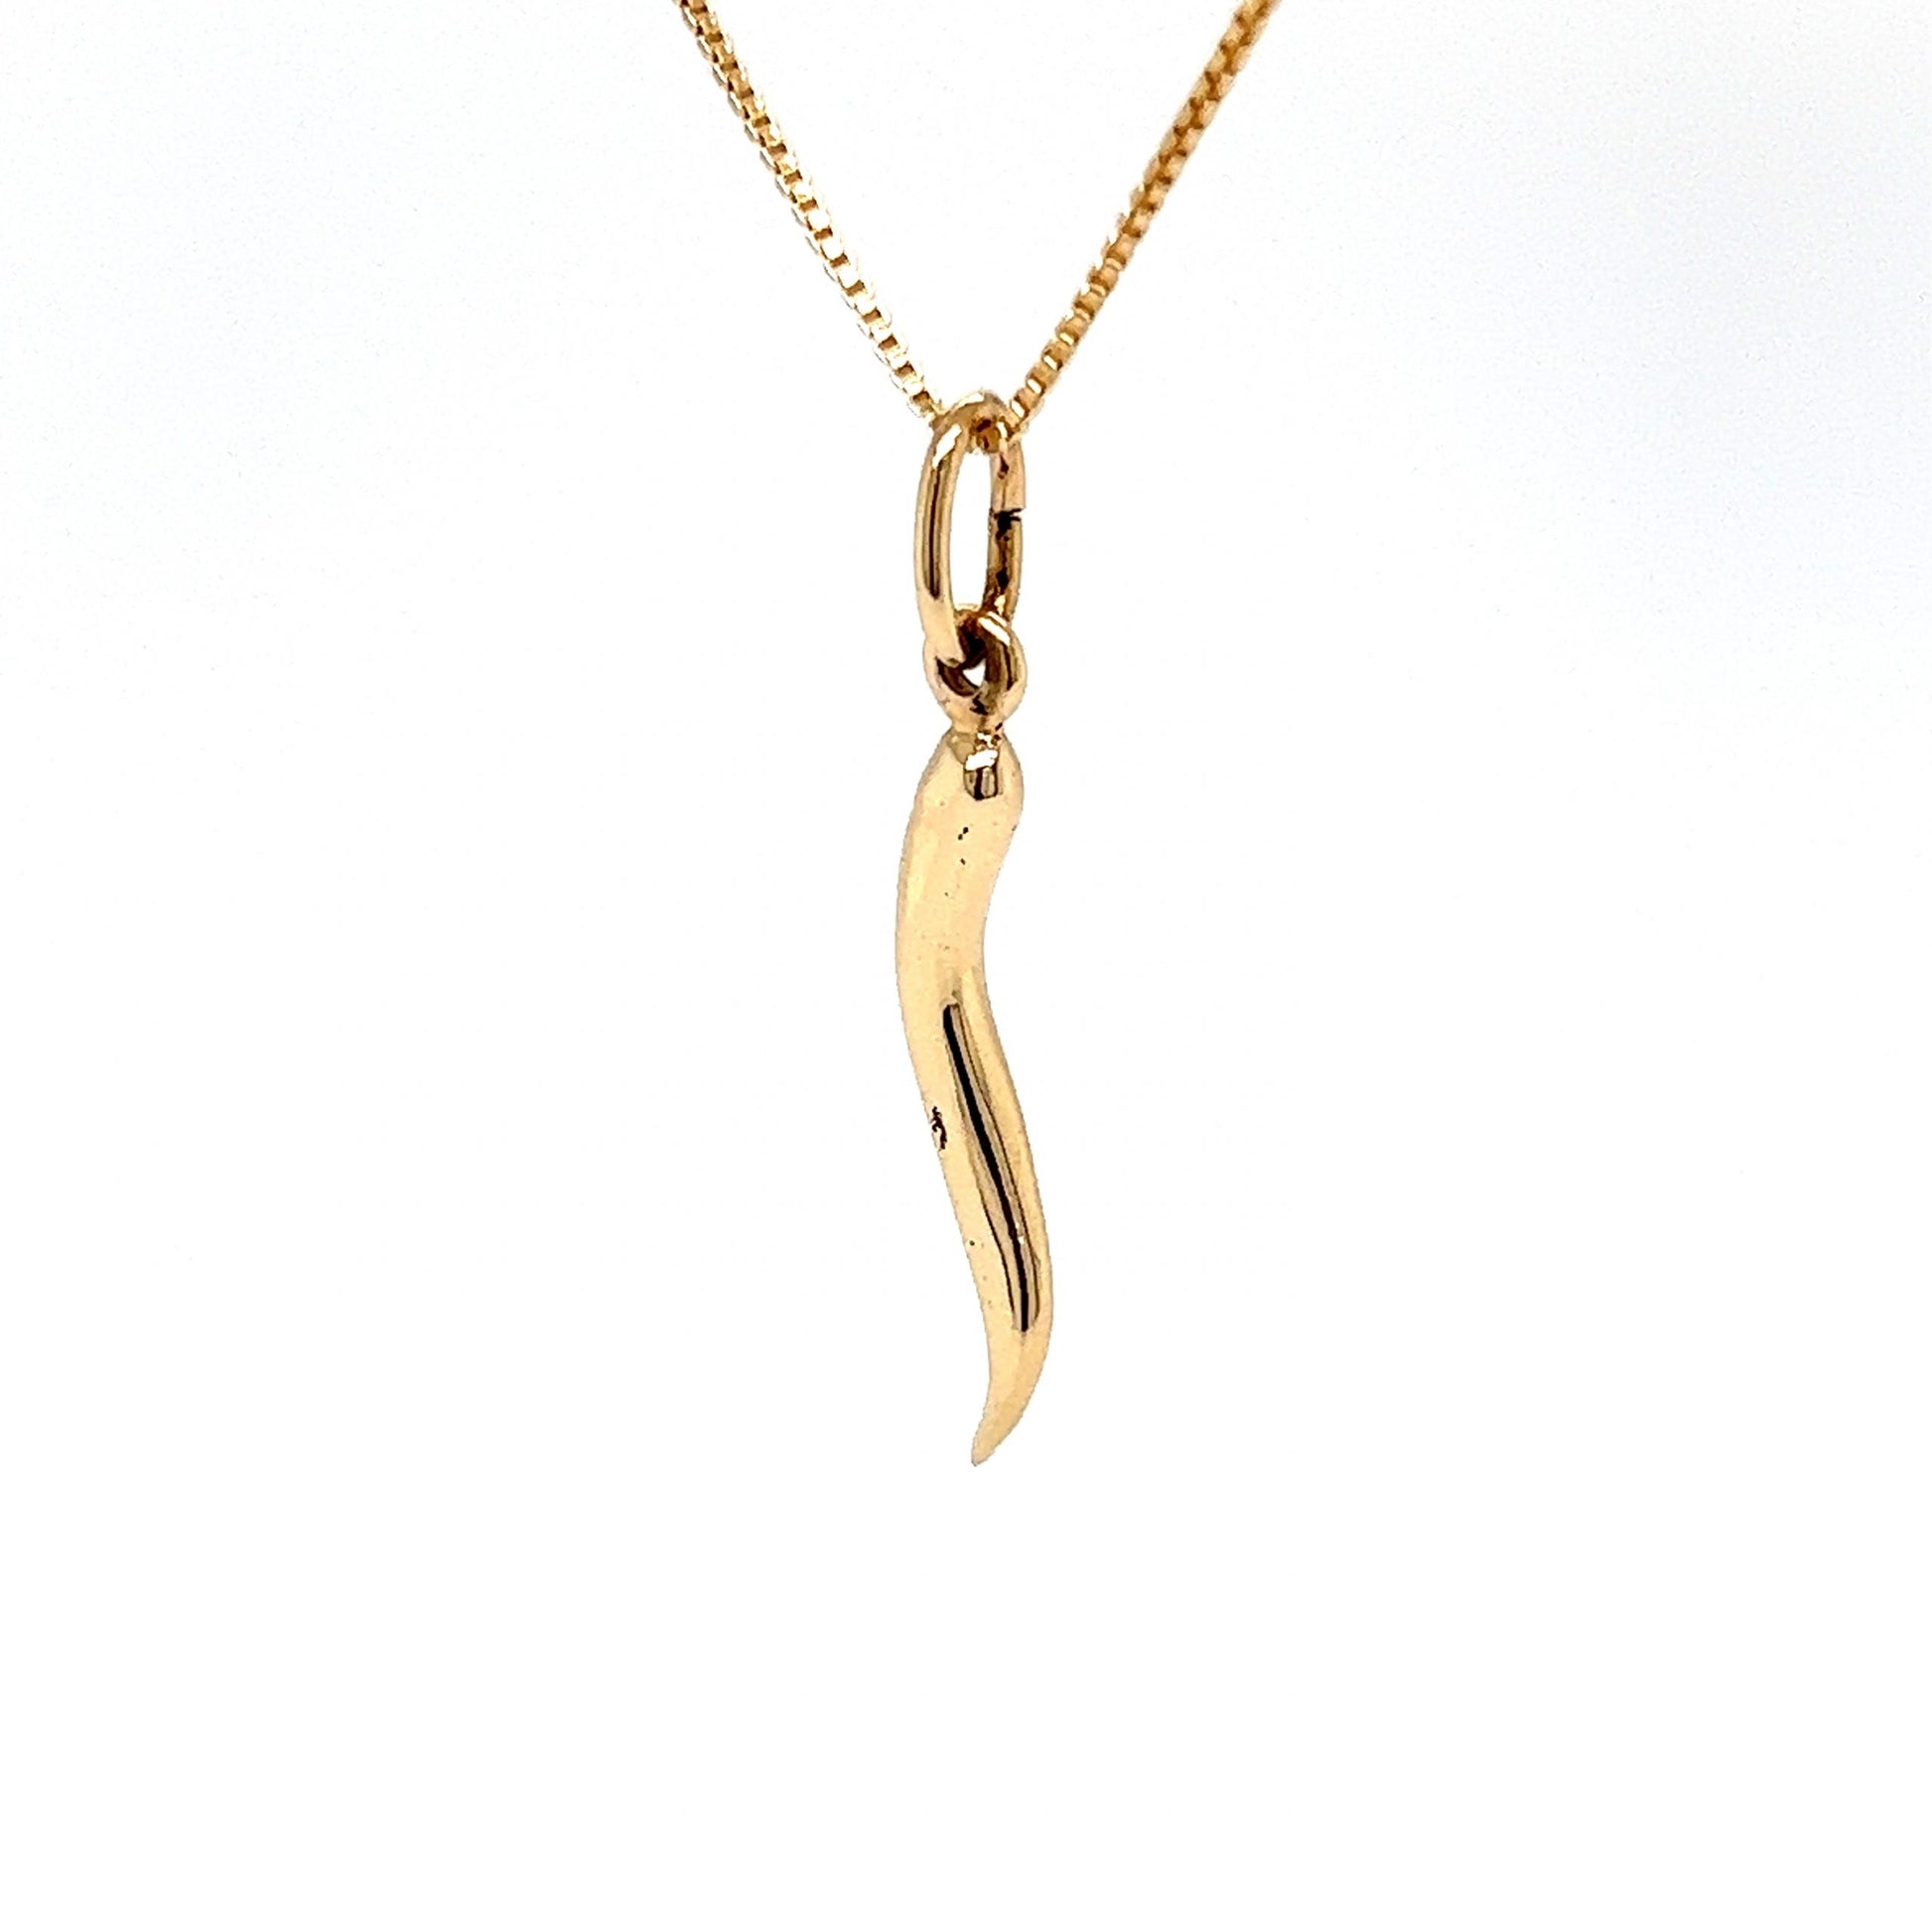 Lucky Cornicello Pendant Necklace in 14k Yellow GoldComposition: 14 Karat Yellow GoldTotal Gram Weight: 4.2 gInscription: 14k 